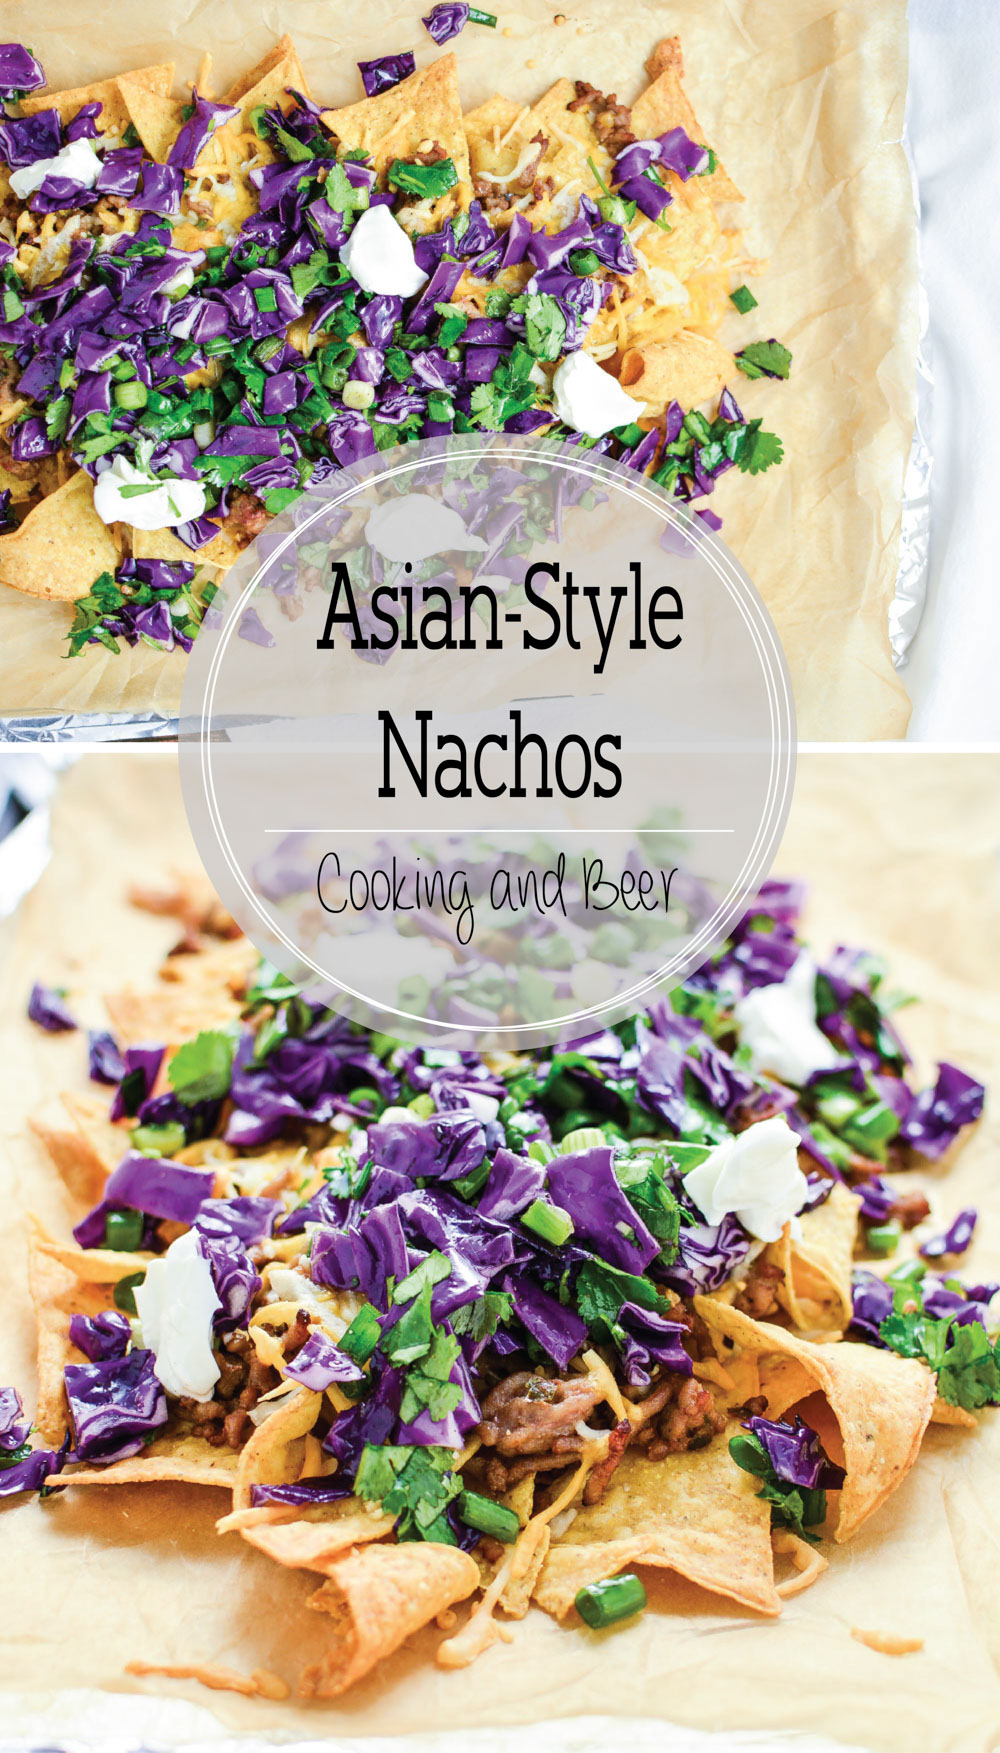 Asian-Style Nachos are the perfect spin on a classic game day recipe!